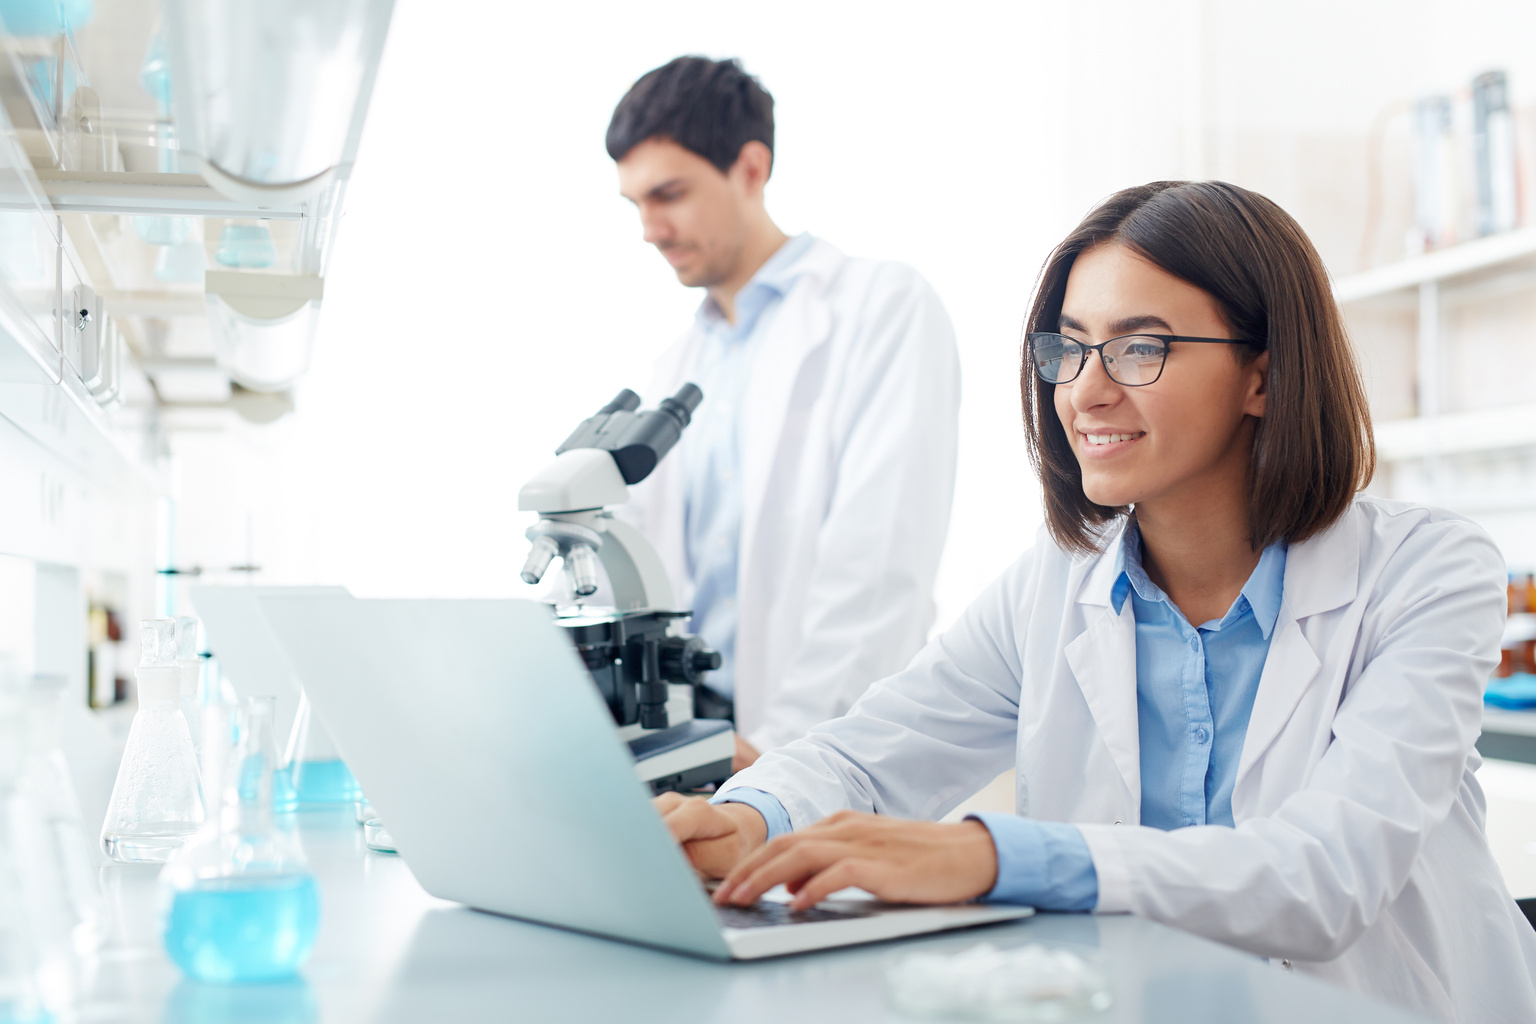 Medical professional conducting research in a lab using a laptop and microsope